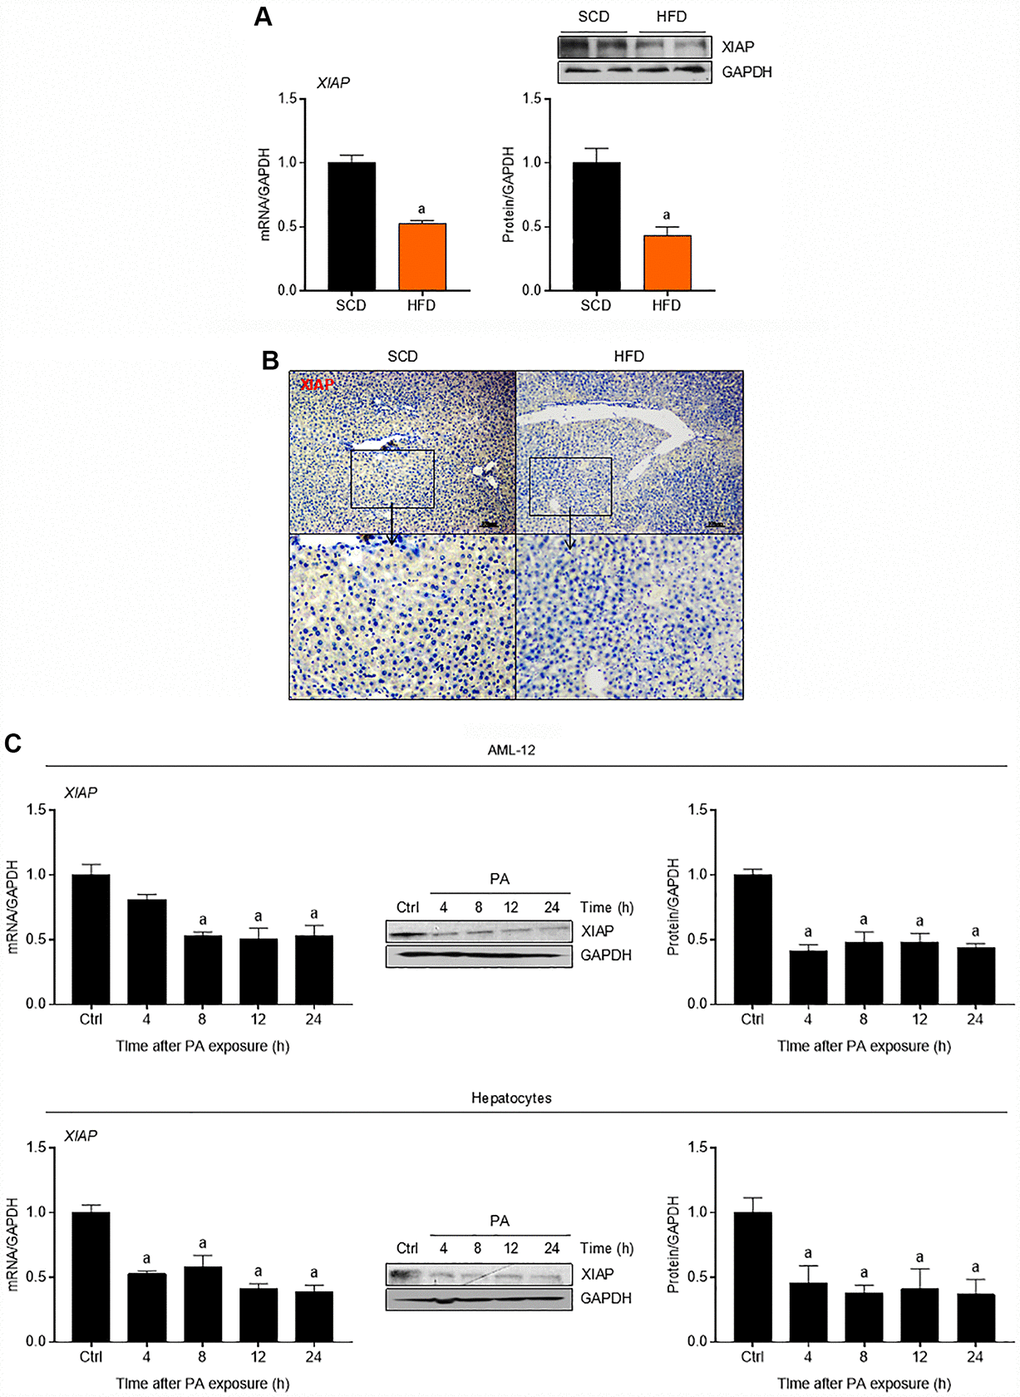 XIAP is down-regulated in fatty liver of mice fed with HFD. (A) qPCR, immunoblotting and (B) immunohistochemical analysis of XIAP expression in liver tissues from scrambled RNA mice fed a SCD or HFD for 12 weeks. (C) Primary mice hepatocytes and normal AML-12 cells were treated with 250 μM palmitate (PA) for 0, 4, 8, 12 or 24 hours, followed by determination of XIAP expression in mRNA and protein levels using qPCR or western blotting detection. For all bar plots shown, data are expressed as the mean ± SEM. n = 8 per group. ap 